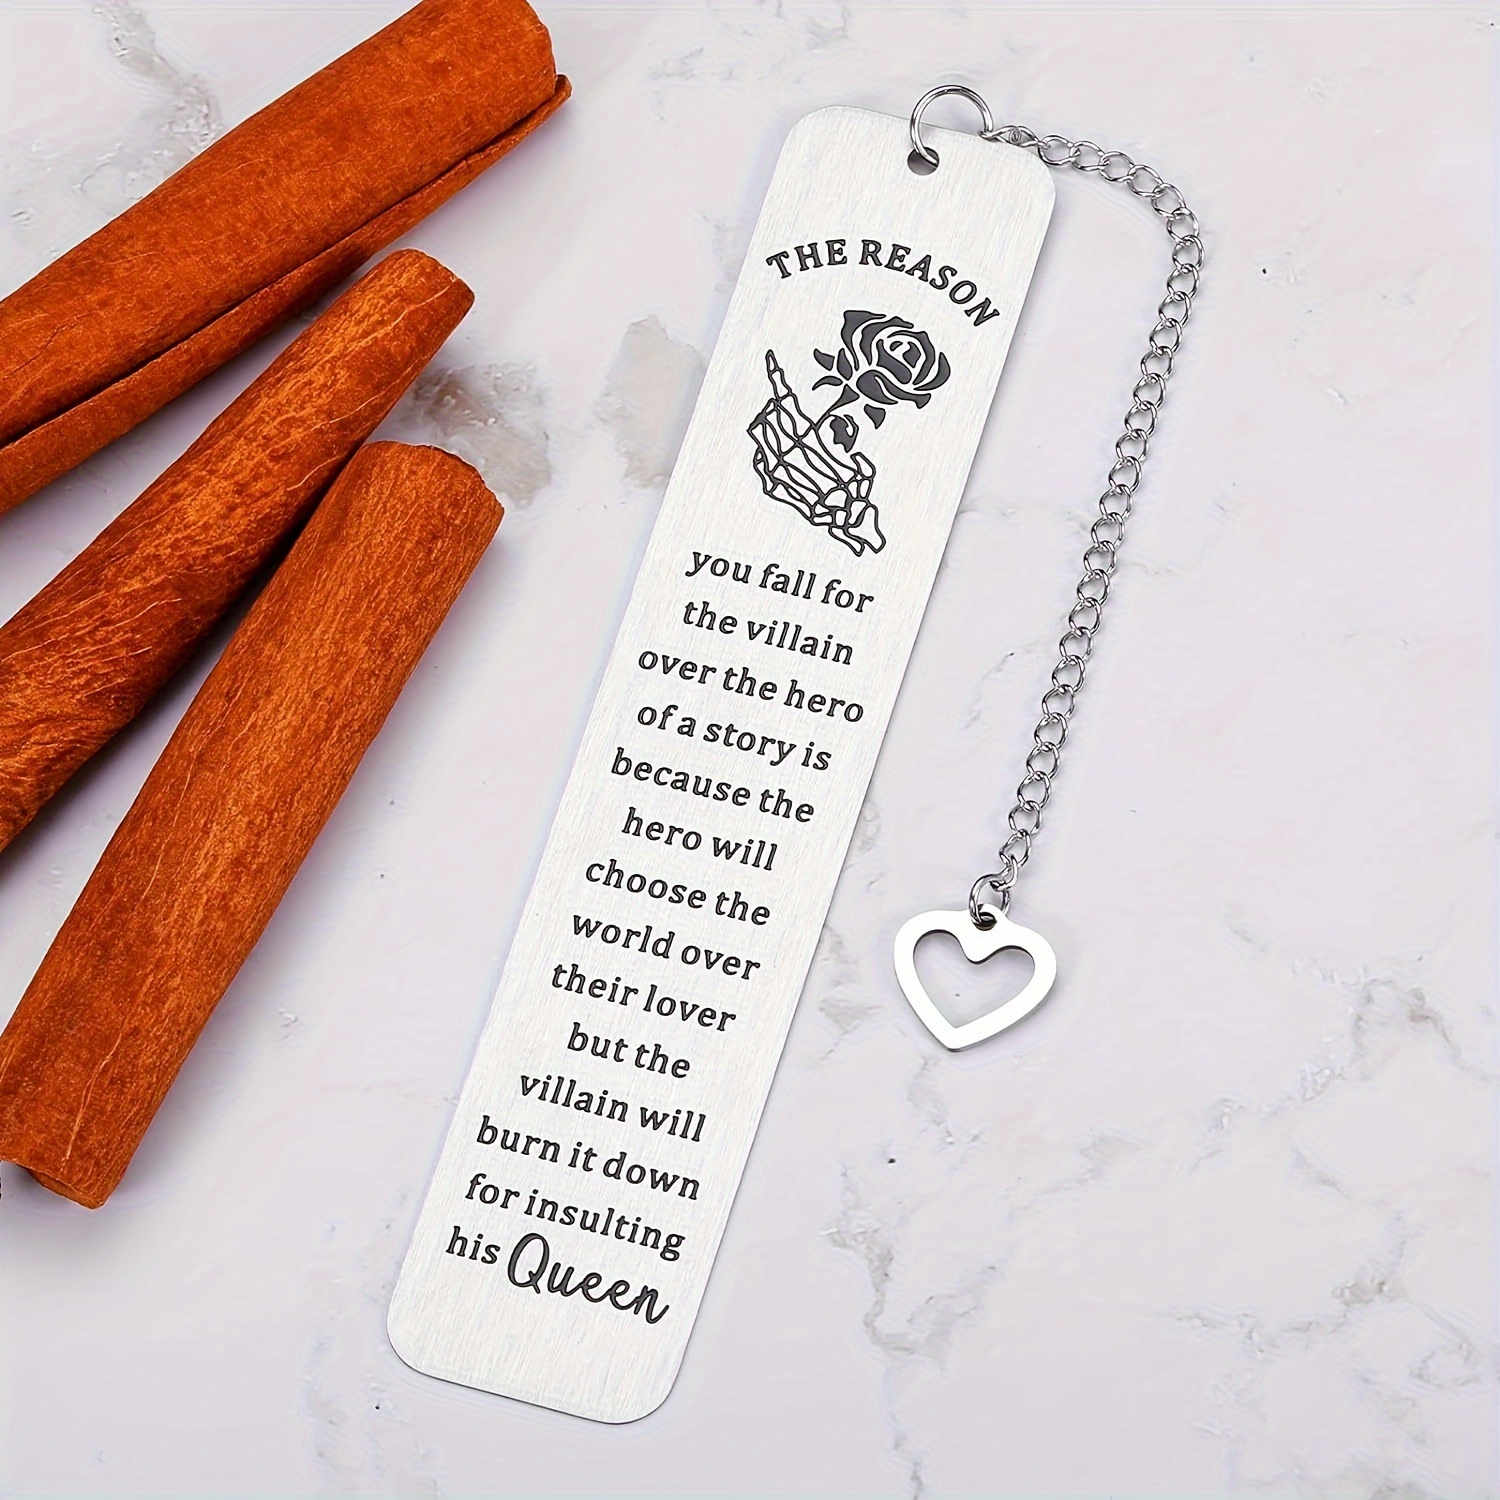 

1pc Stainless Steel Bookmark Men And Women Book Lovers Bookmark Couple Anniversary Steel Birthday Gift For Her His Reader Bookworm Reading Gift Book Club Gift Dark Romantic Gift Book Lovers